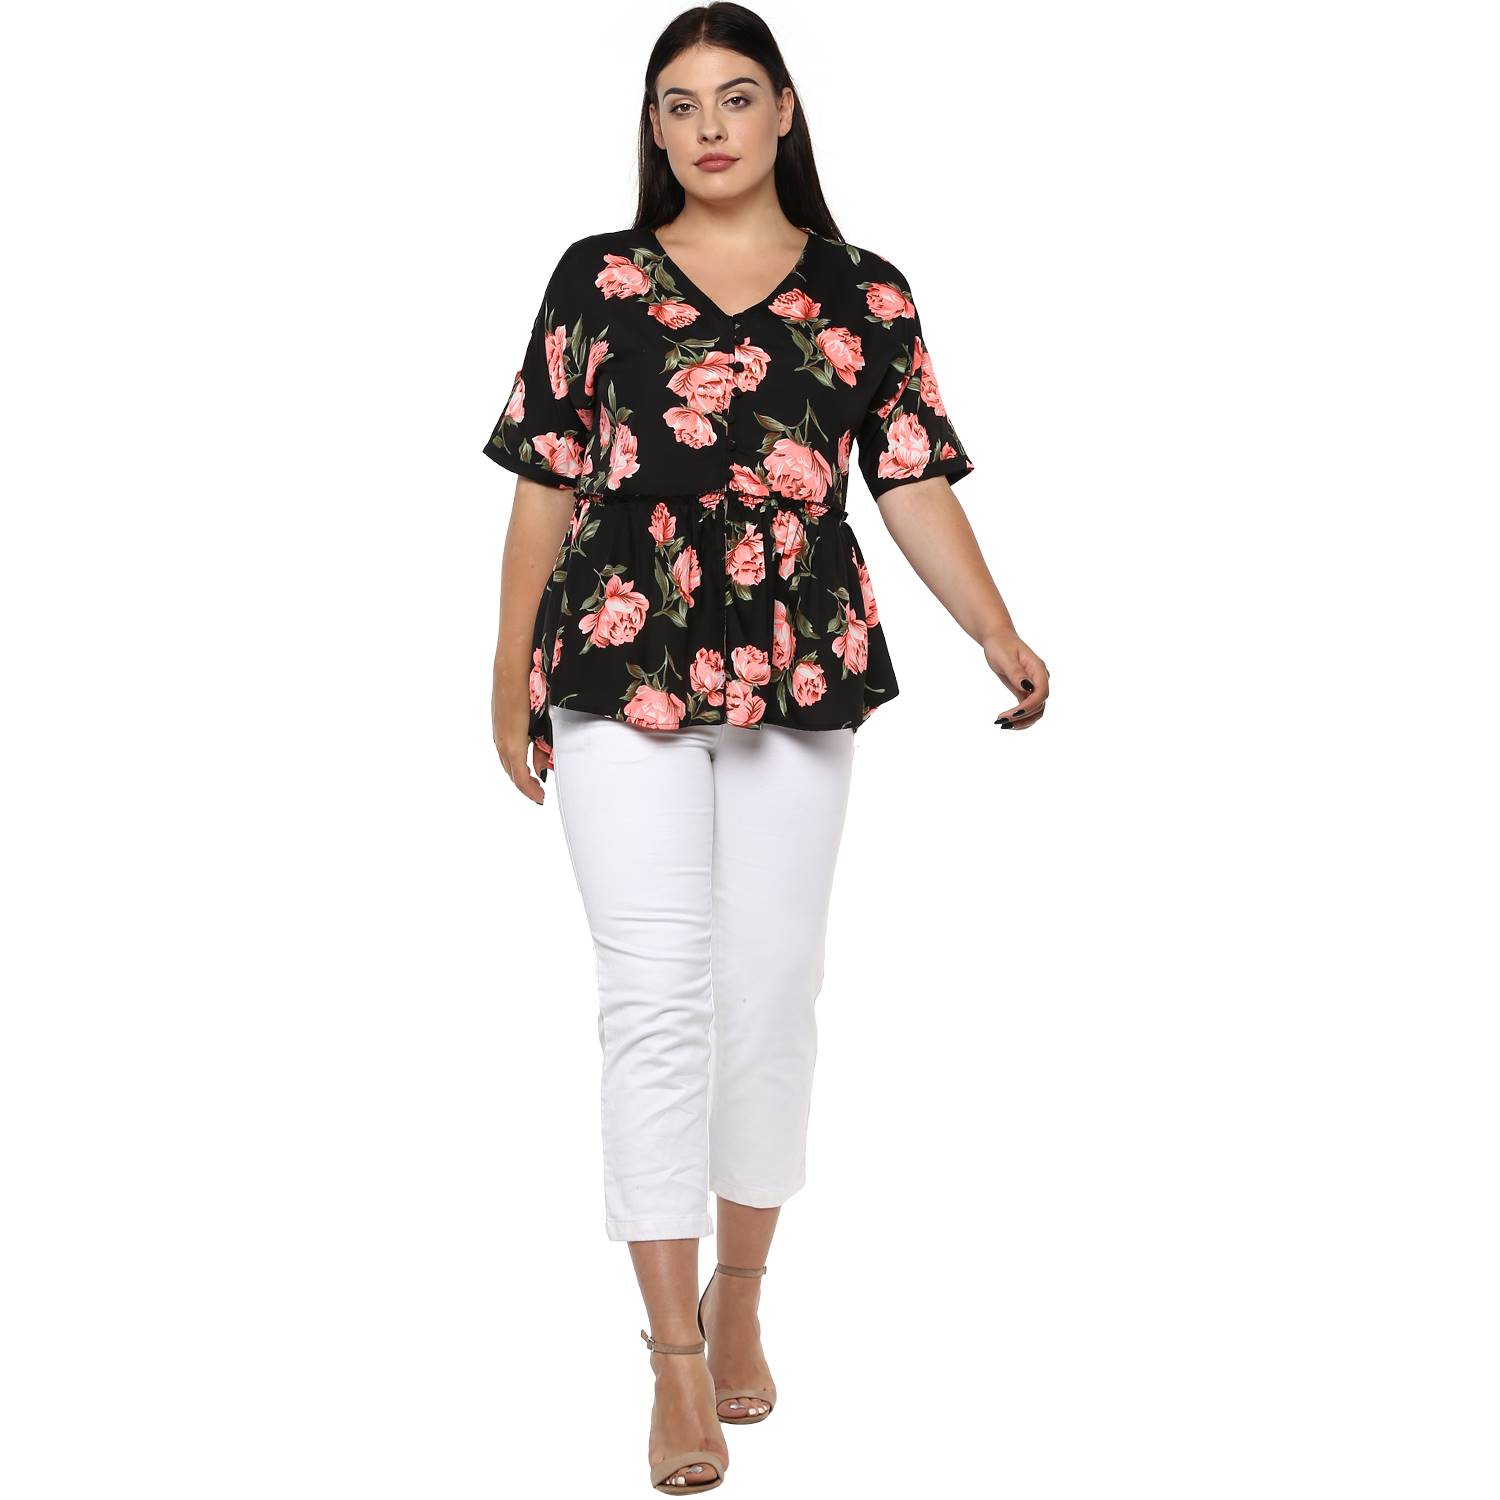 All plus size cloth online 